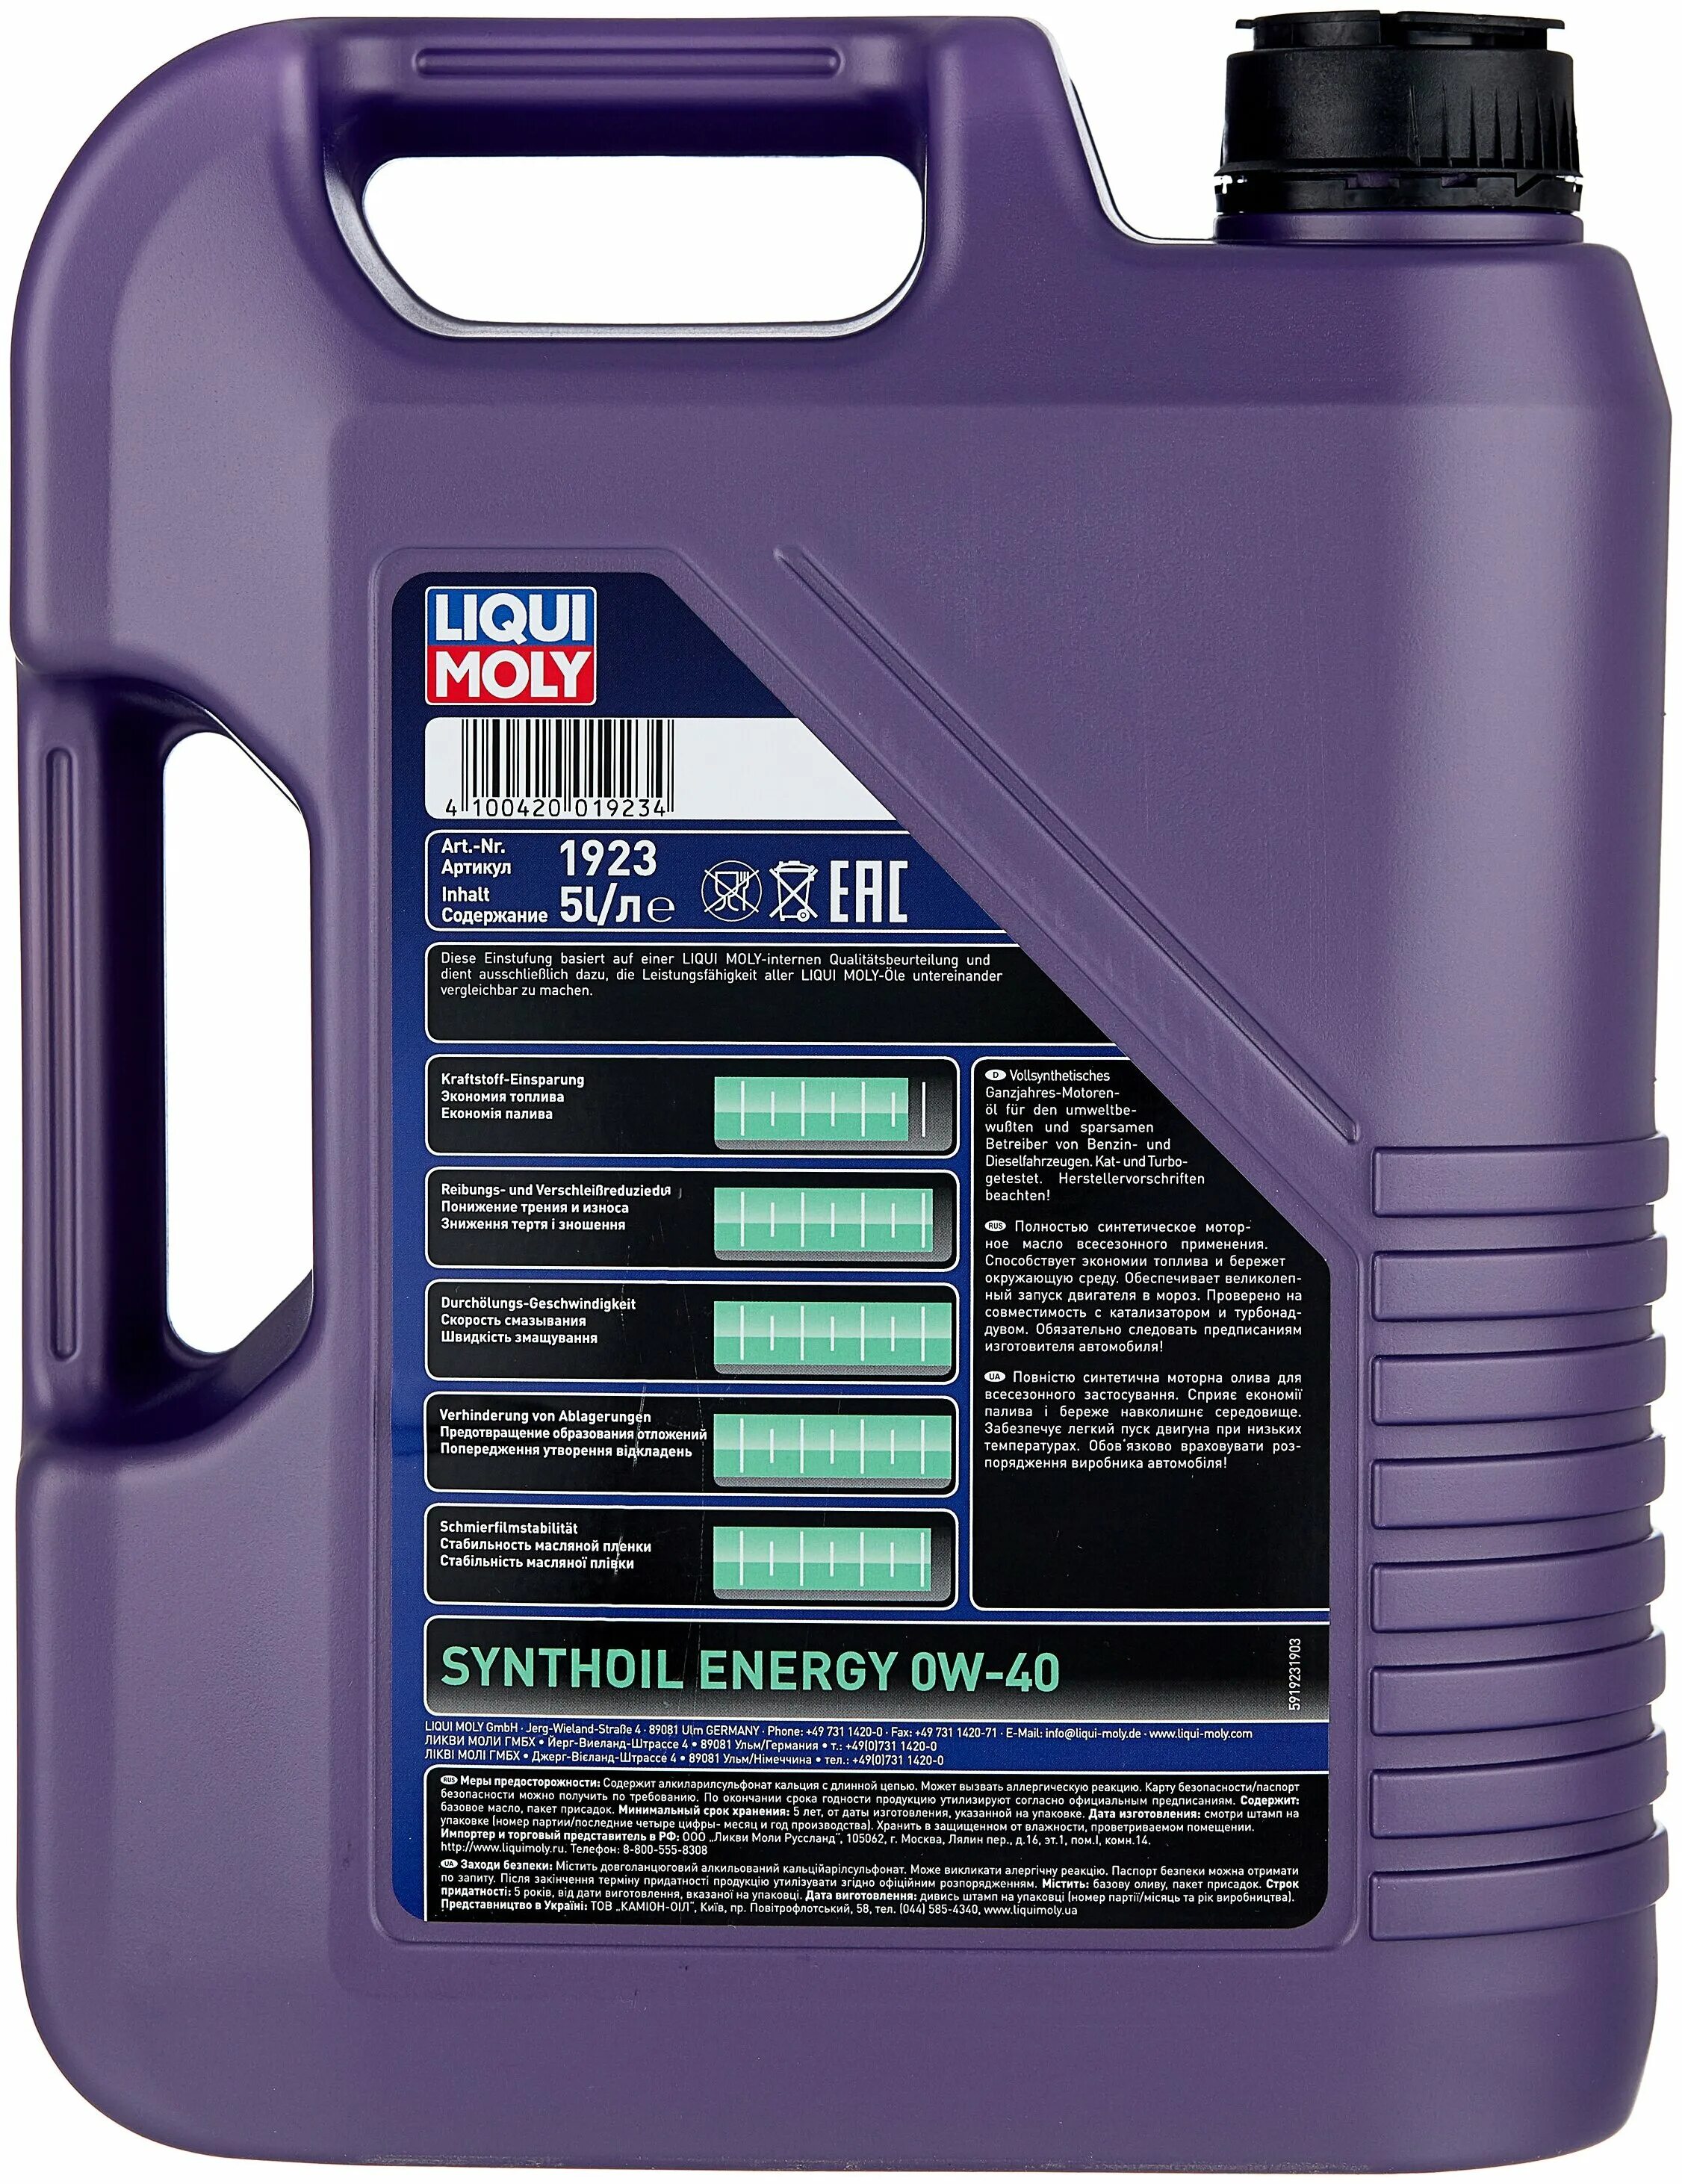 Liqui Moly Synthoil Energy 0w-40. Liqui-Moly Synthoil Energy 0w40 4л. Моторное масло Liqui Moly Synthoil Energy 0w-30. LM 1151 масло Synthoil.